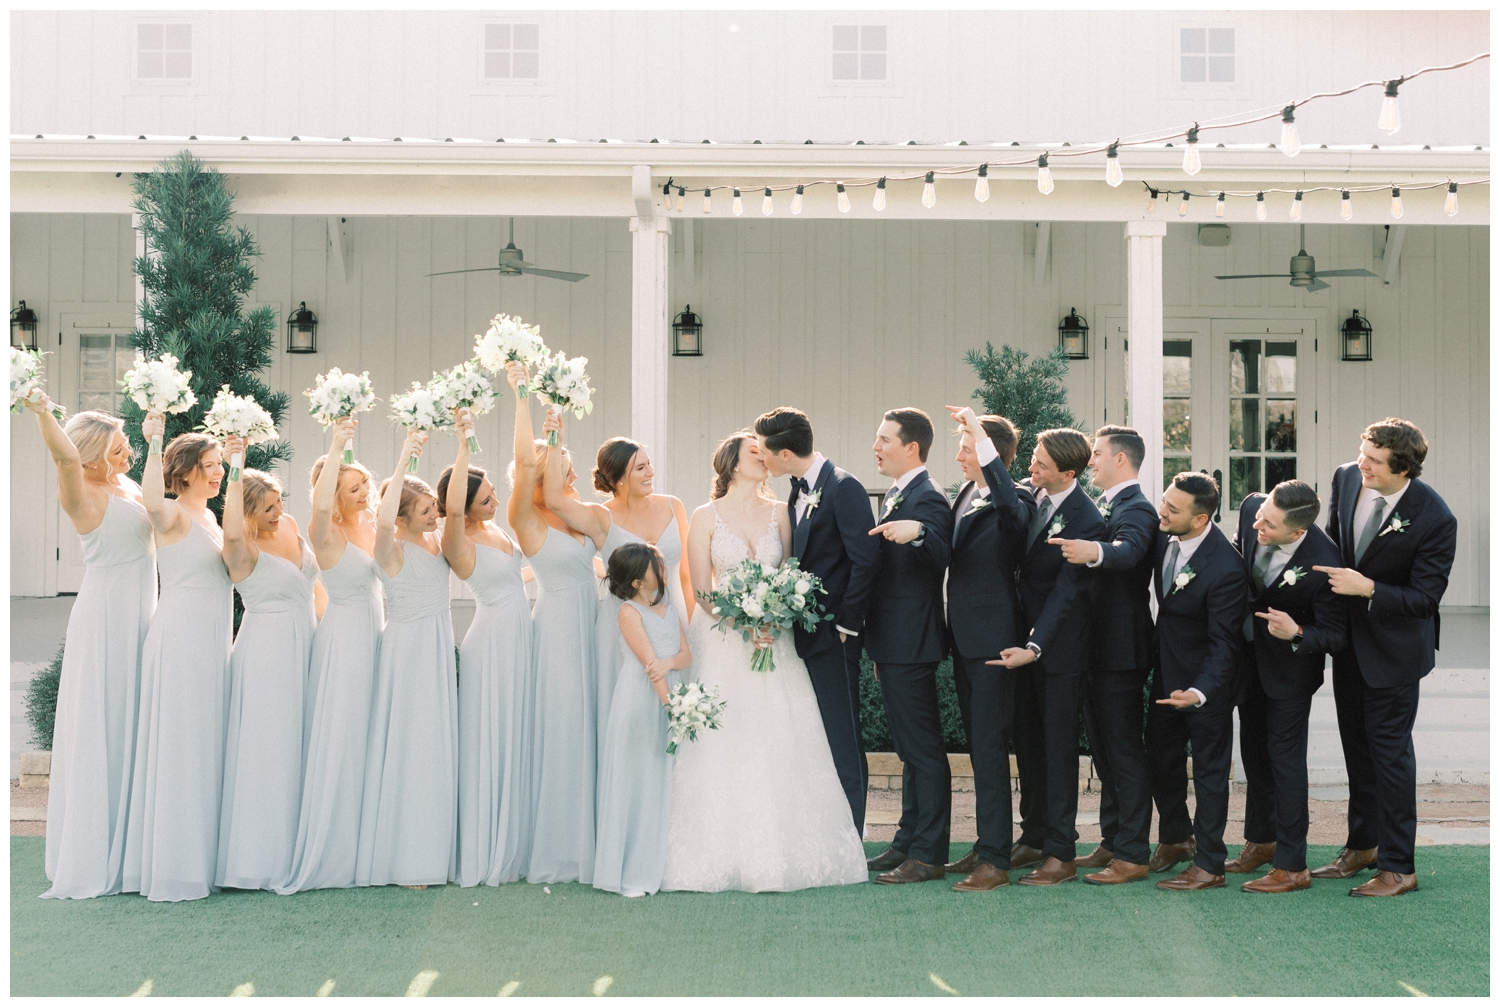 bride and groom kissing outdoors with bridal party celebrating around them